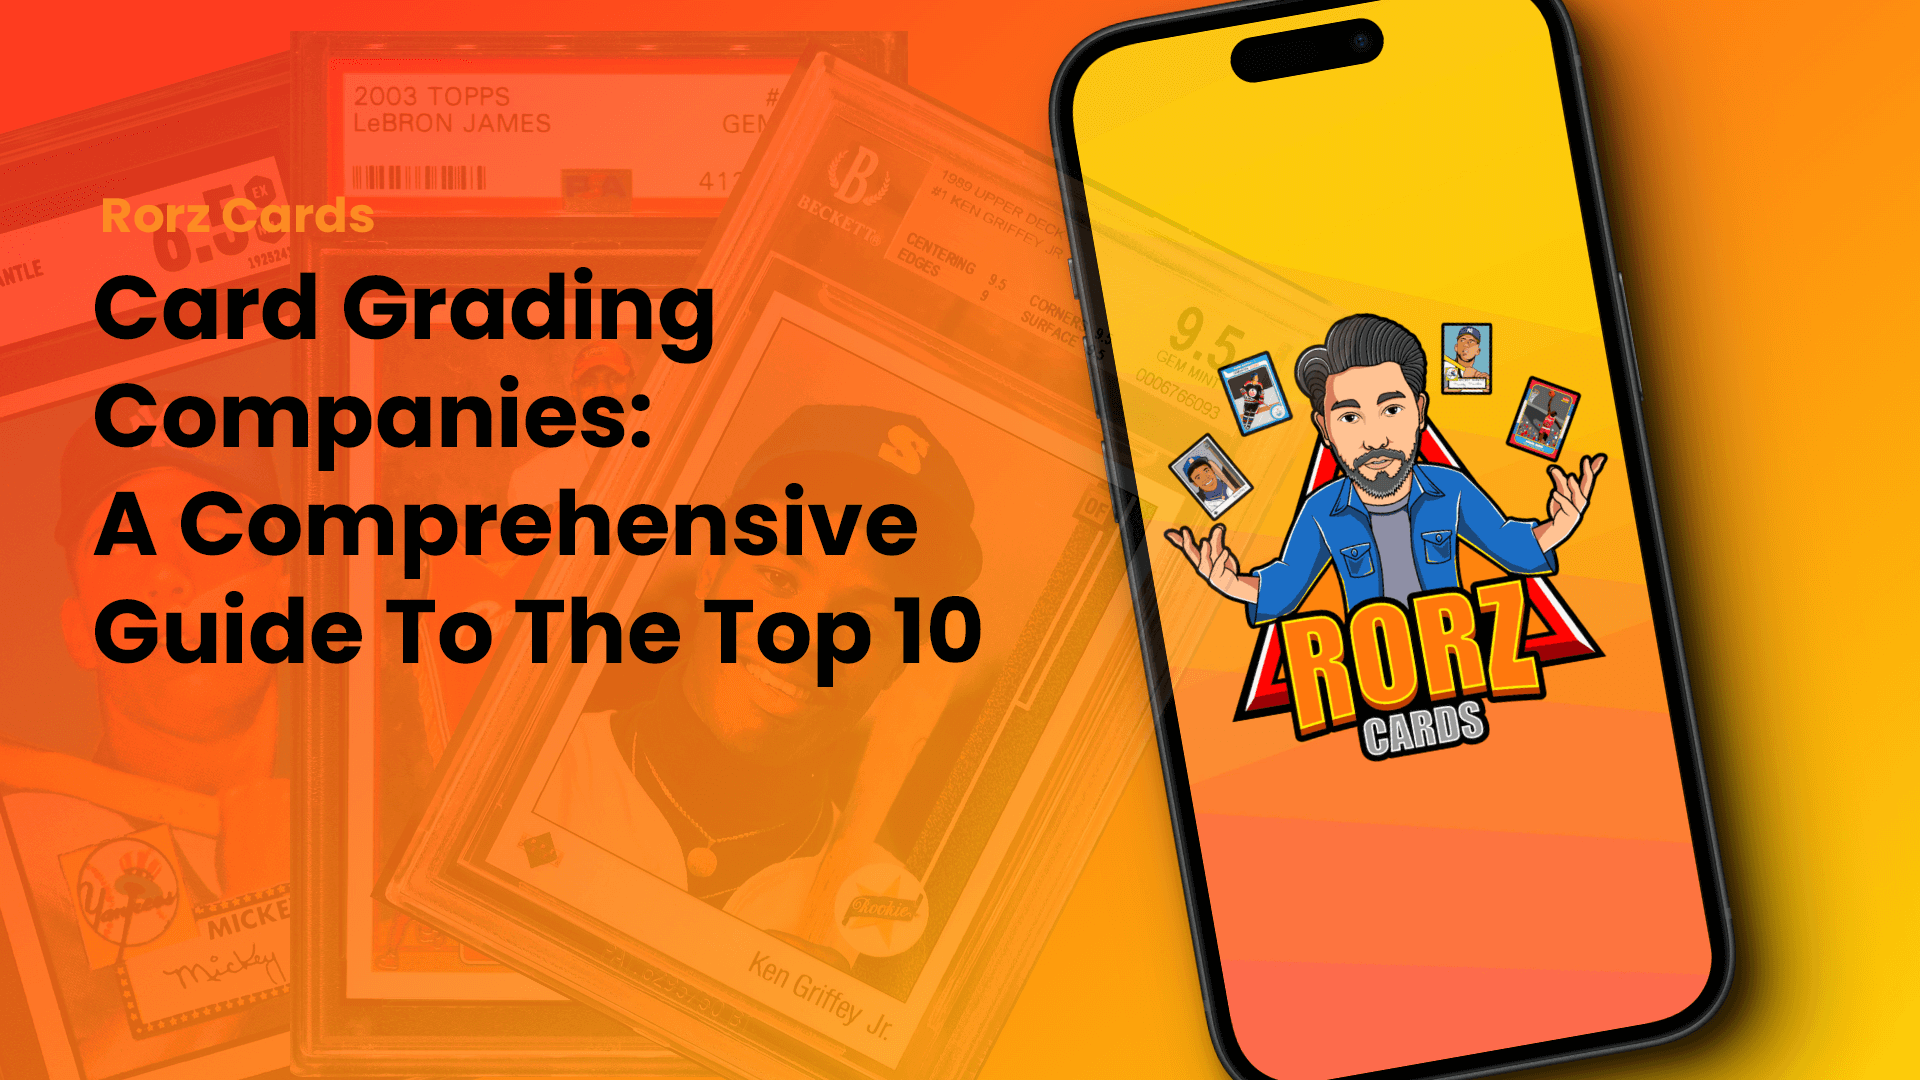 Grading Card Companies - A Comprehensive Guide to the Top 10